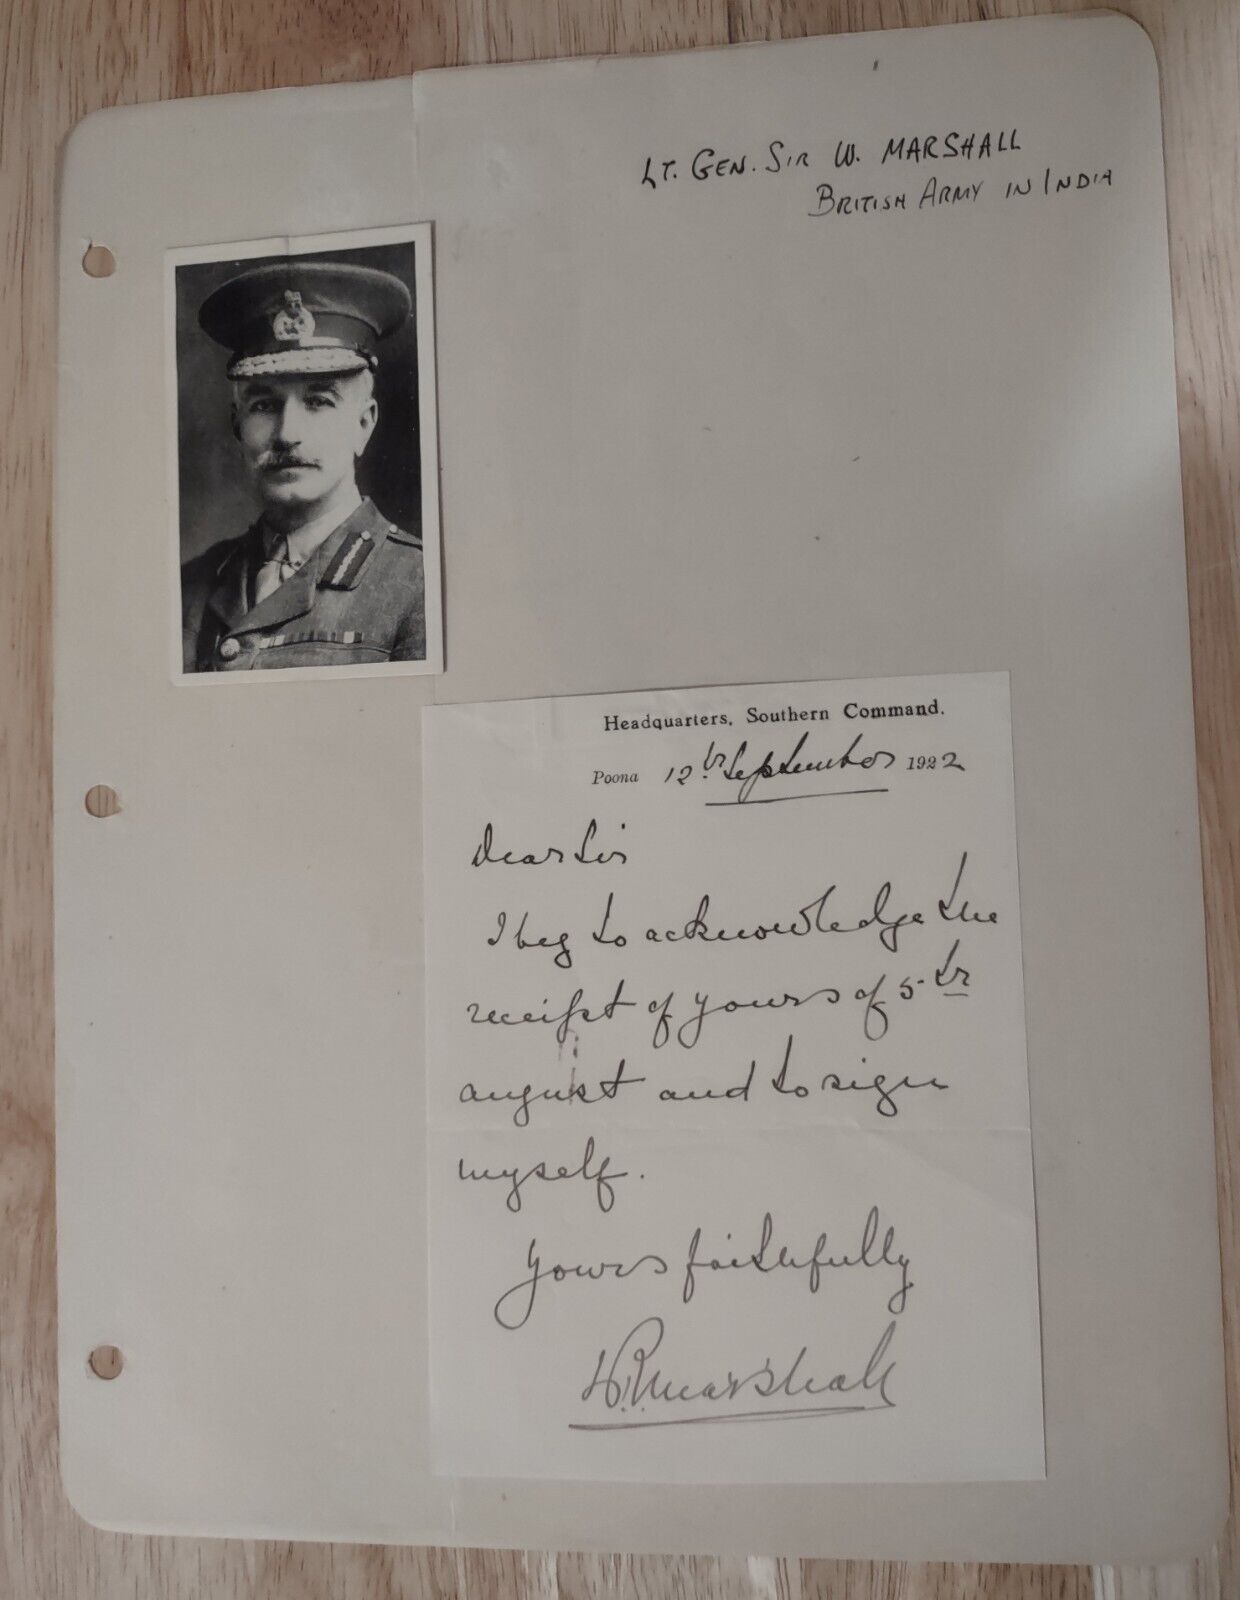 LT. GENERAL SIR W MARSHALL ALS BRITISH ARMY IN INDIA. AUTOGRAPHED SIGNED LETTER.